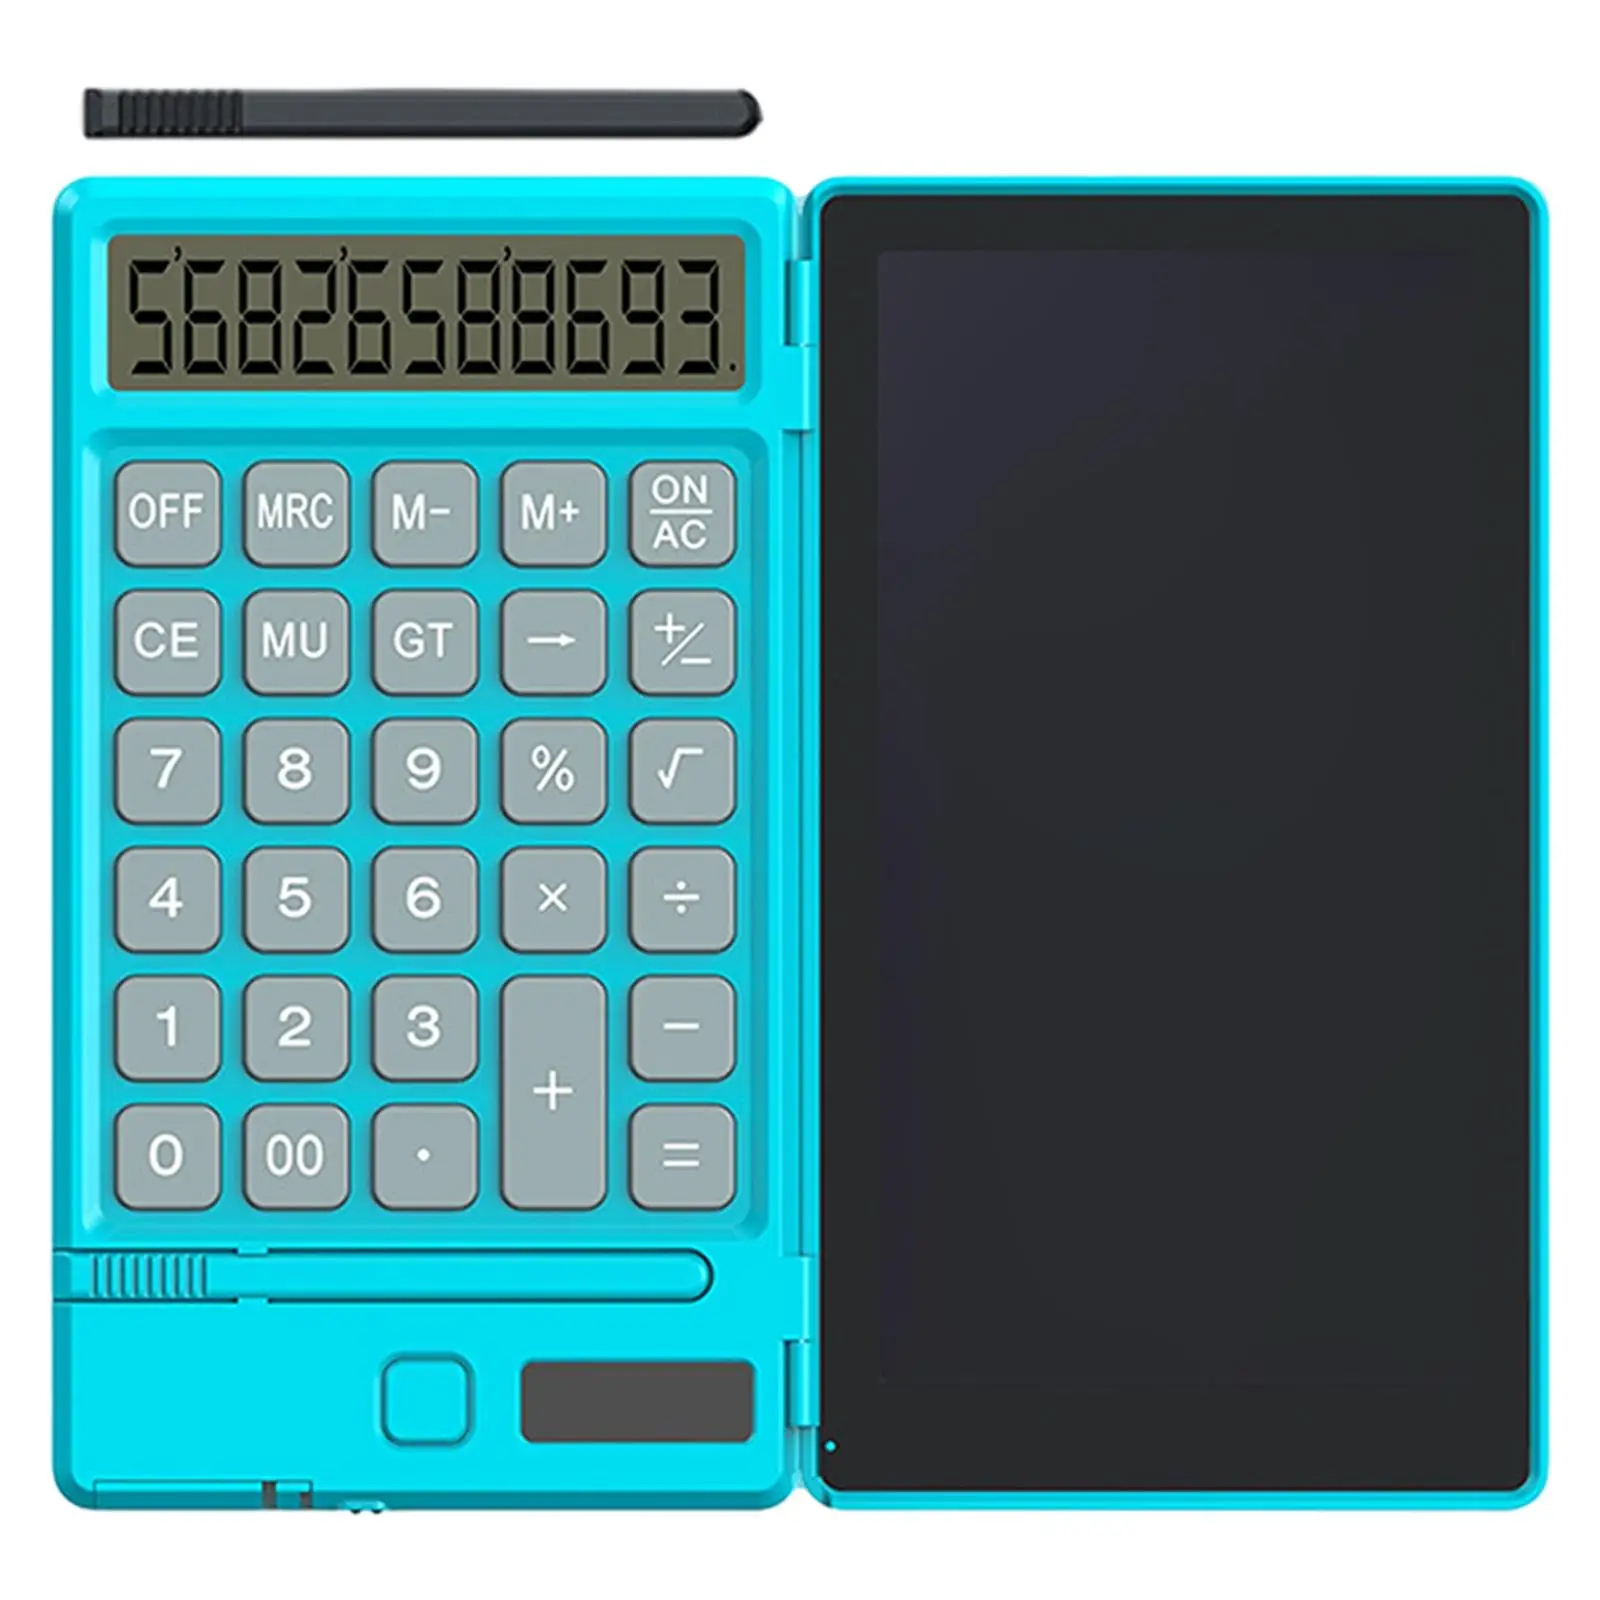 Calculator Writing Tablet Handwriting Board Solar and Battery Dual Power Notepad Desktop Calculators for Electronic Drawing Work